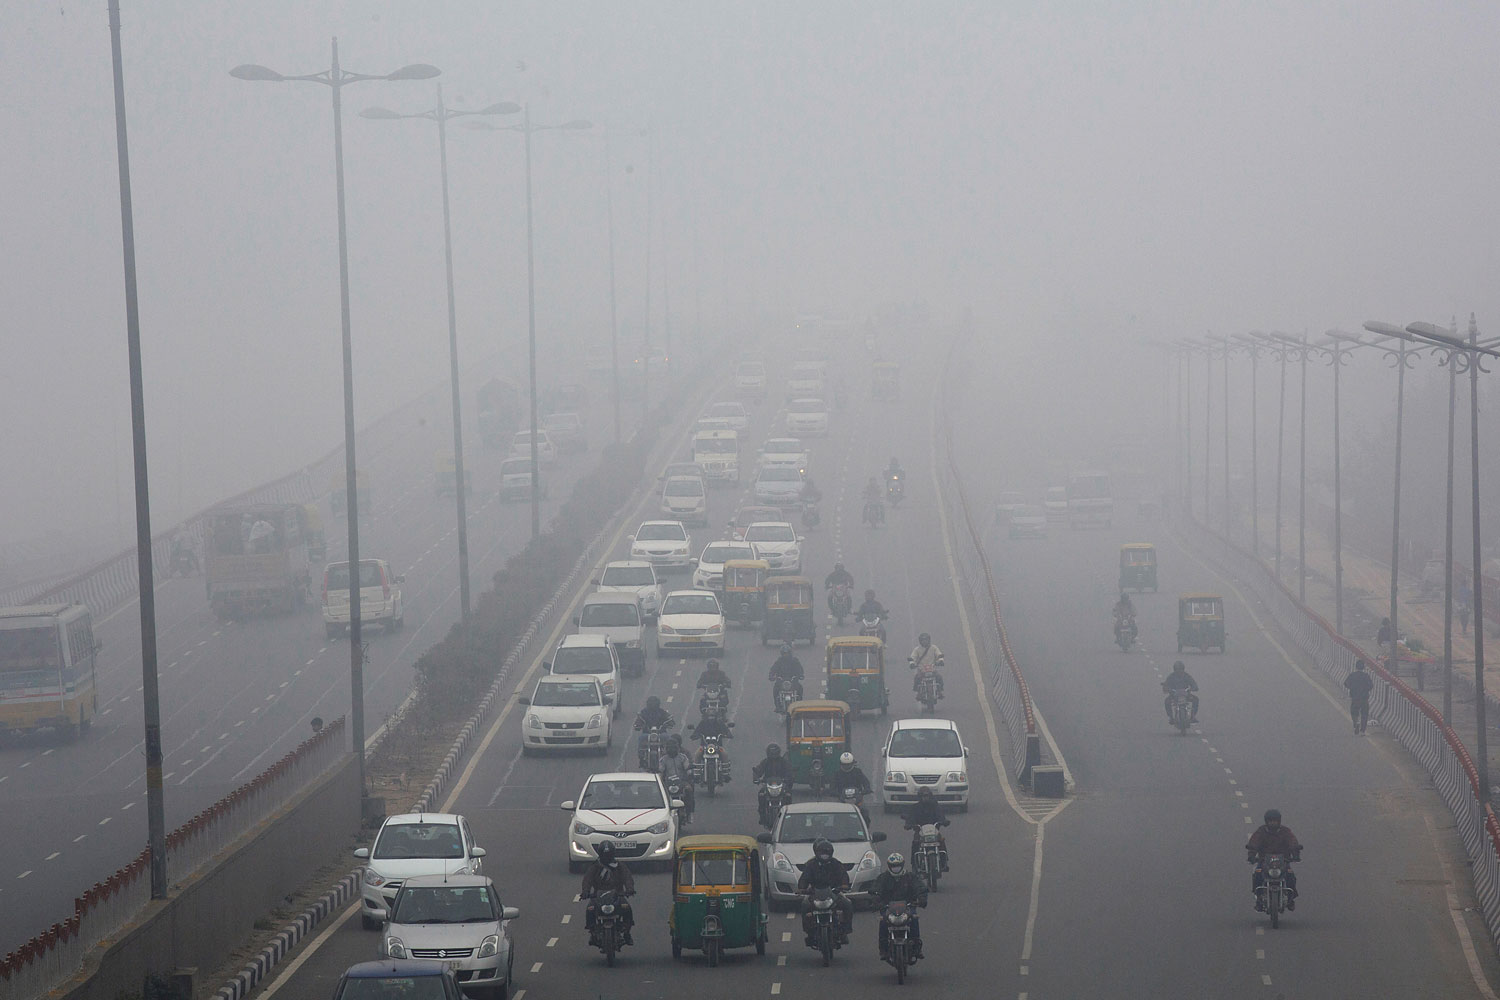 Traffic make way in haze mainly caused by air pollution in Delhi on Jan. 20, 2014 (Kuni Takahashi—Bloomberg/Getty Images)